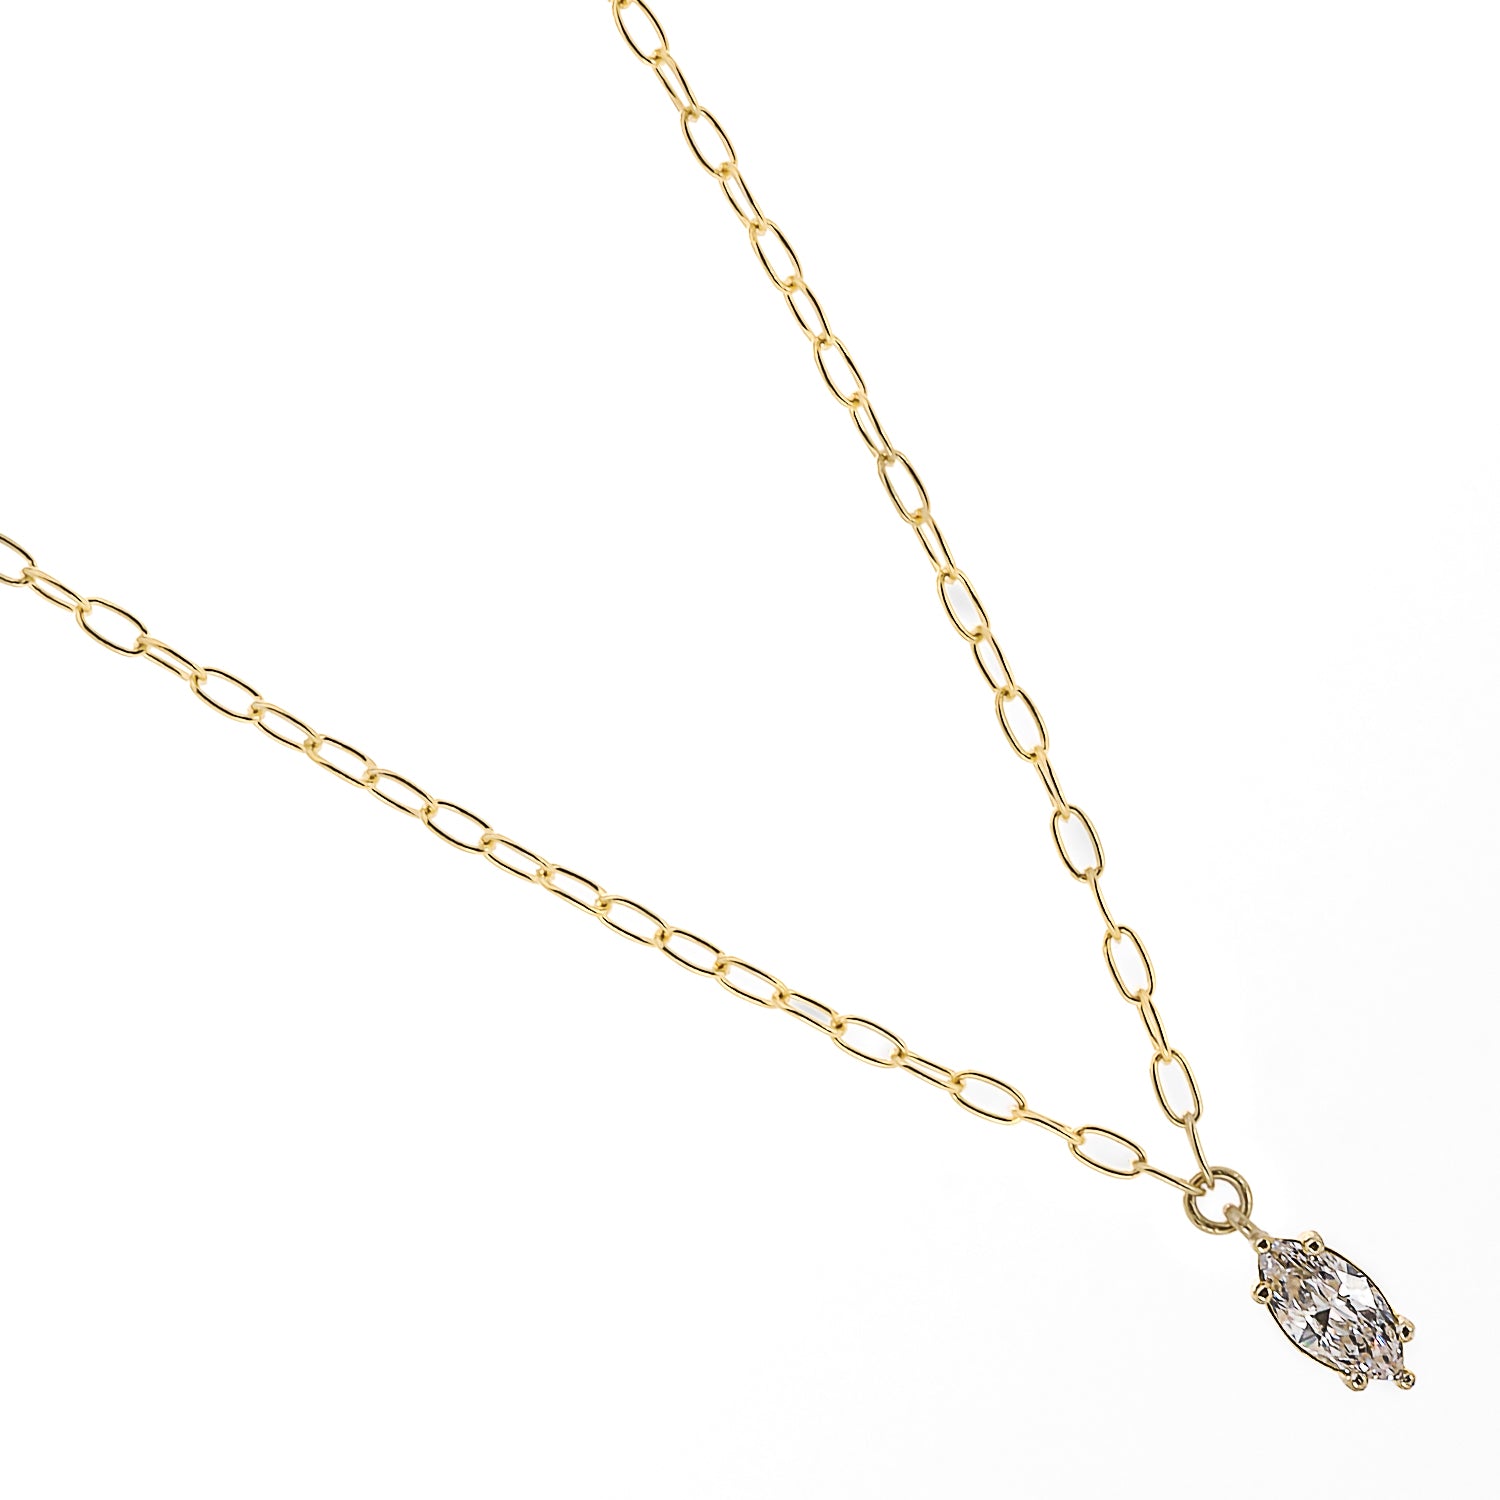 The Gold and Diamond Chain Necklace, a symbol of elegance and sophistication, perfect for adding a touch of timeless beauty to any ensemble.